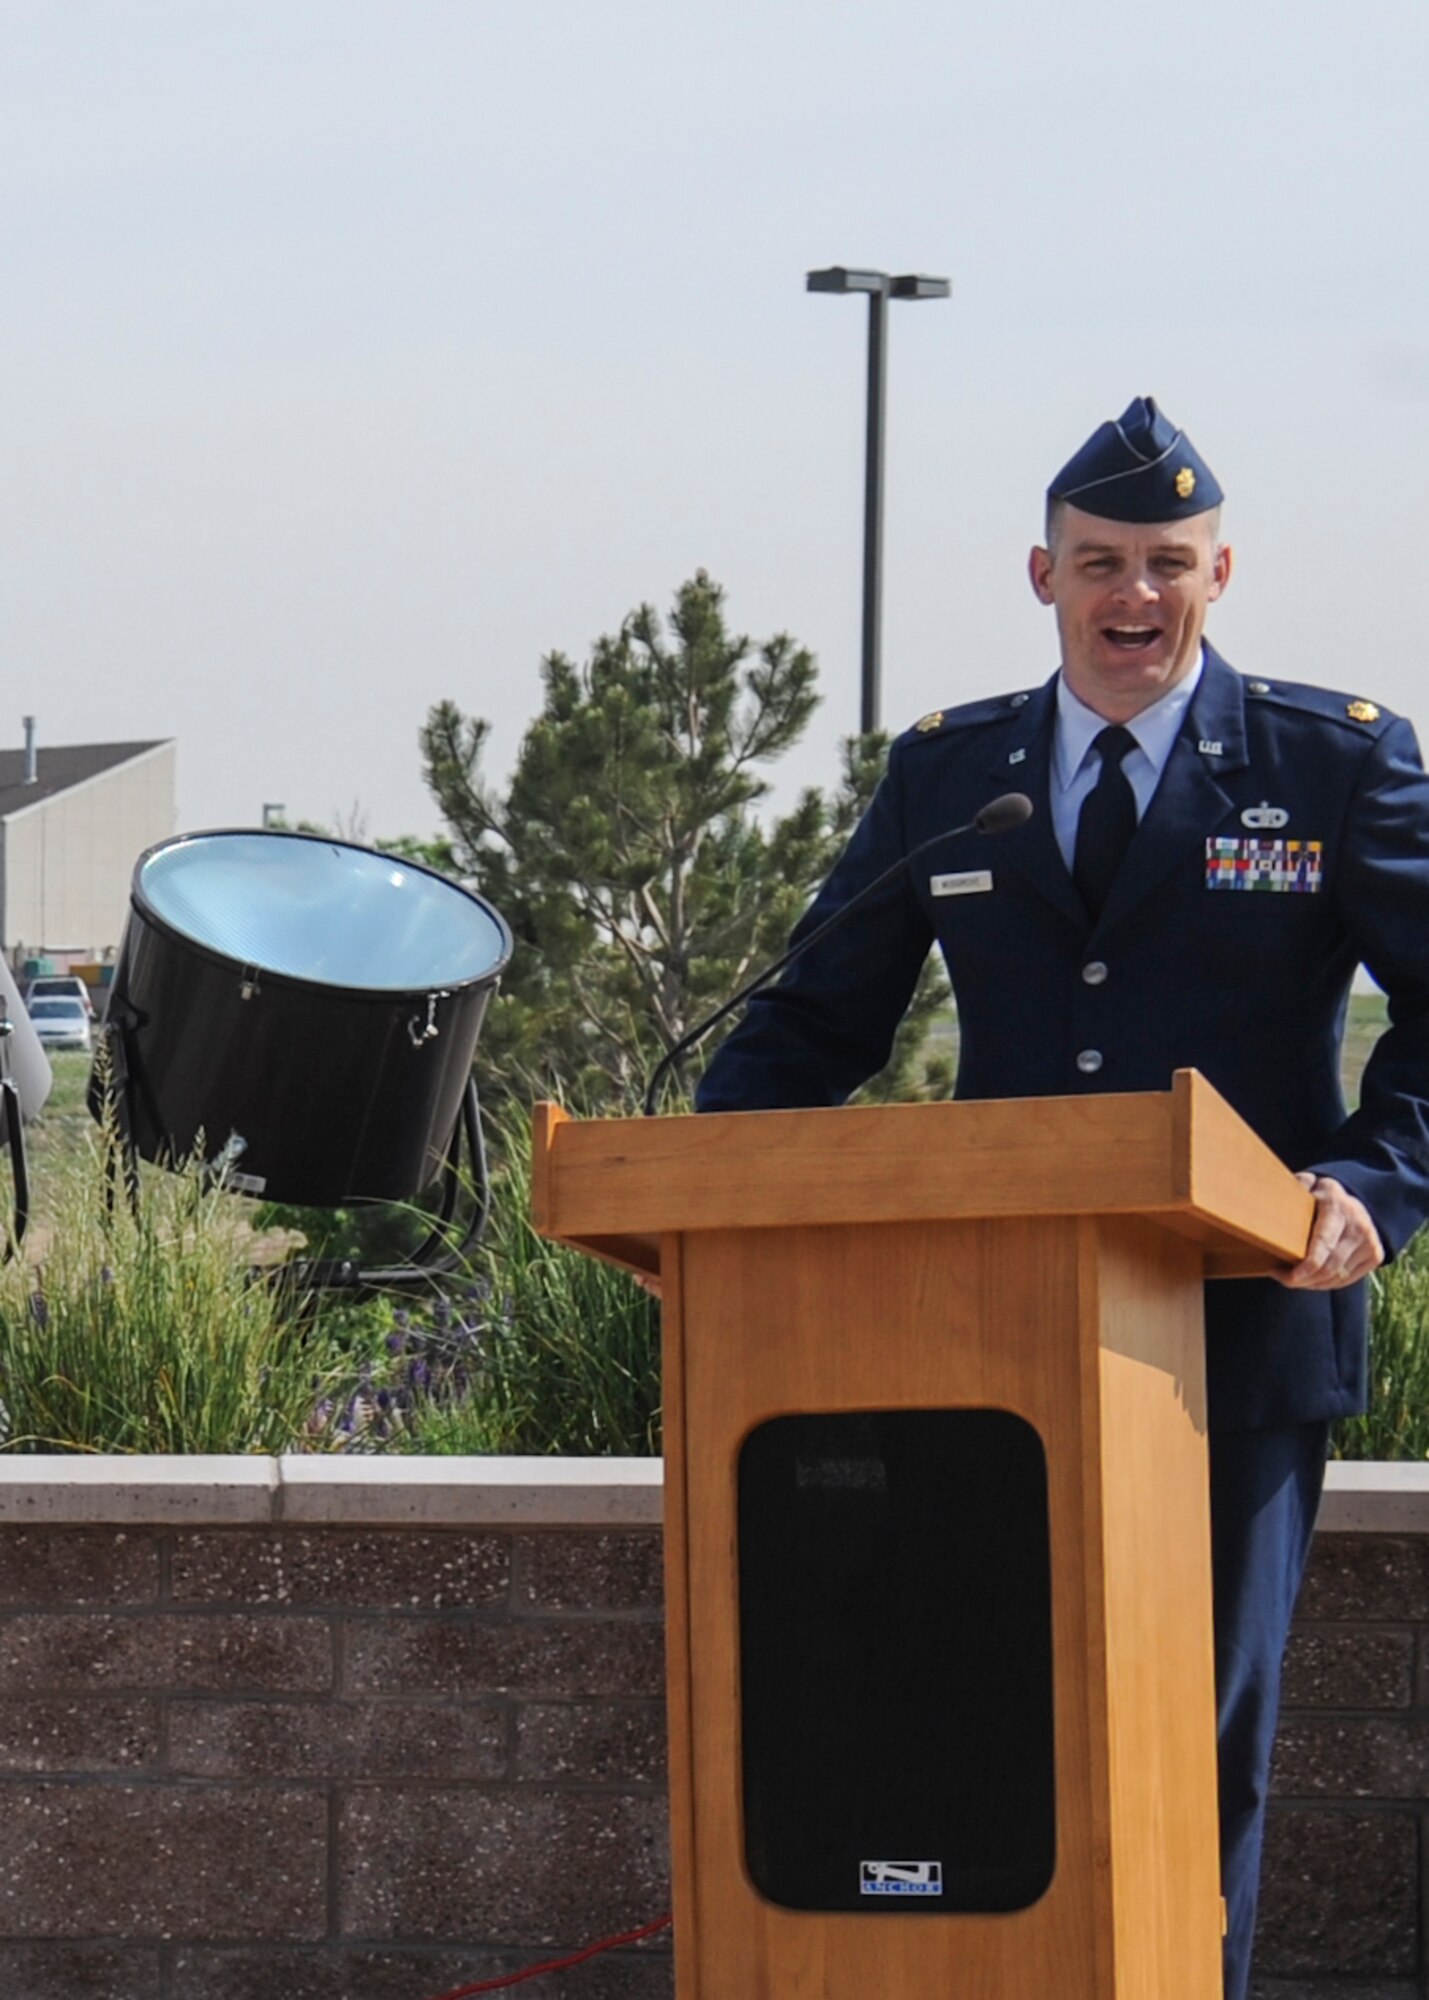 Maj. Nicholas Musgrove, 460th Logistics Readiness Squadron commander, talks to attendees of the 460th LRS change-of-command ceremony June 13, 2013, on Buckley Air Force Base, Colo. Musgrove has served 14 years as a logistician at the squadron, wing and staff levels. (U.S. Air Force photo by Staff Sgt. Christopher Gross/Released)